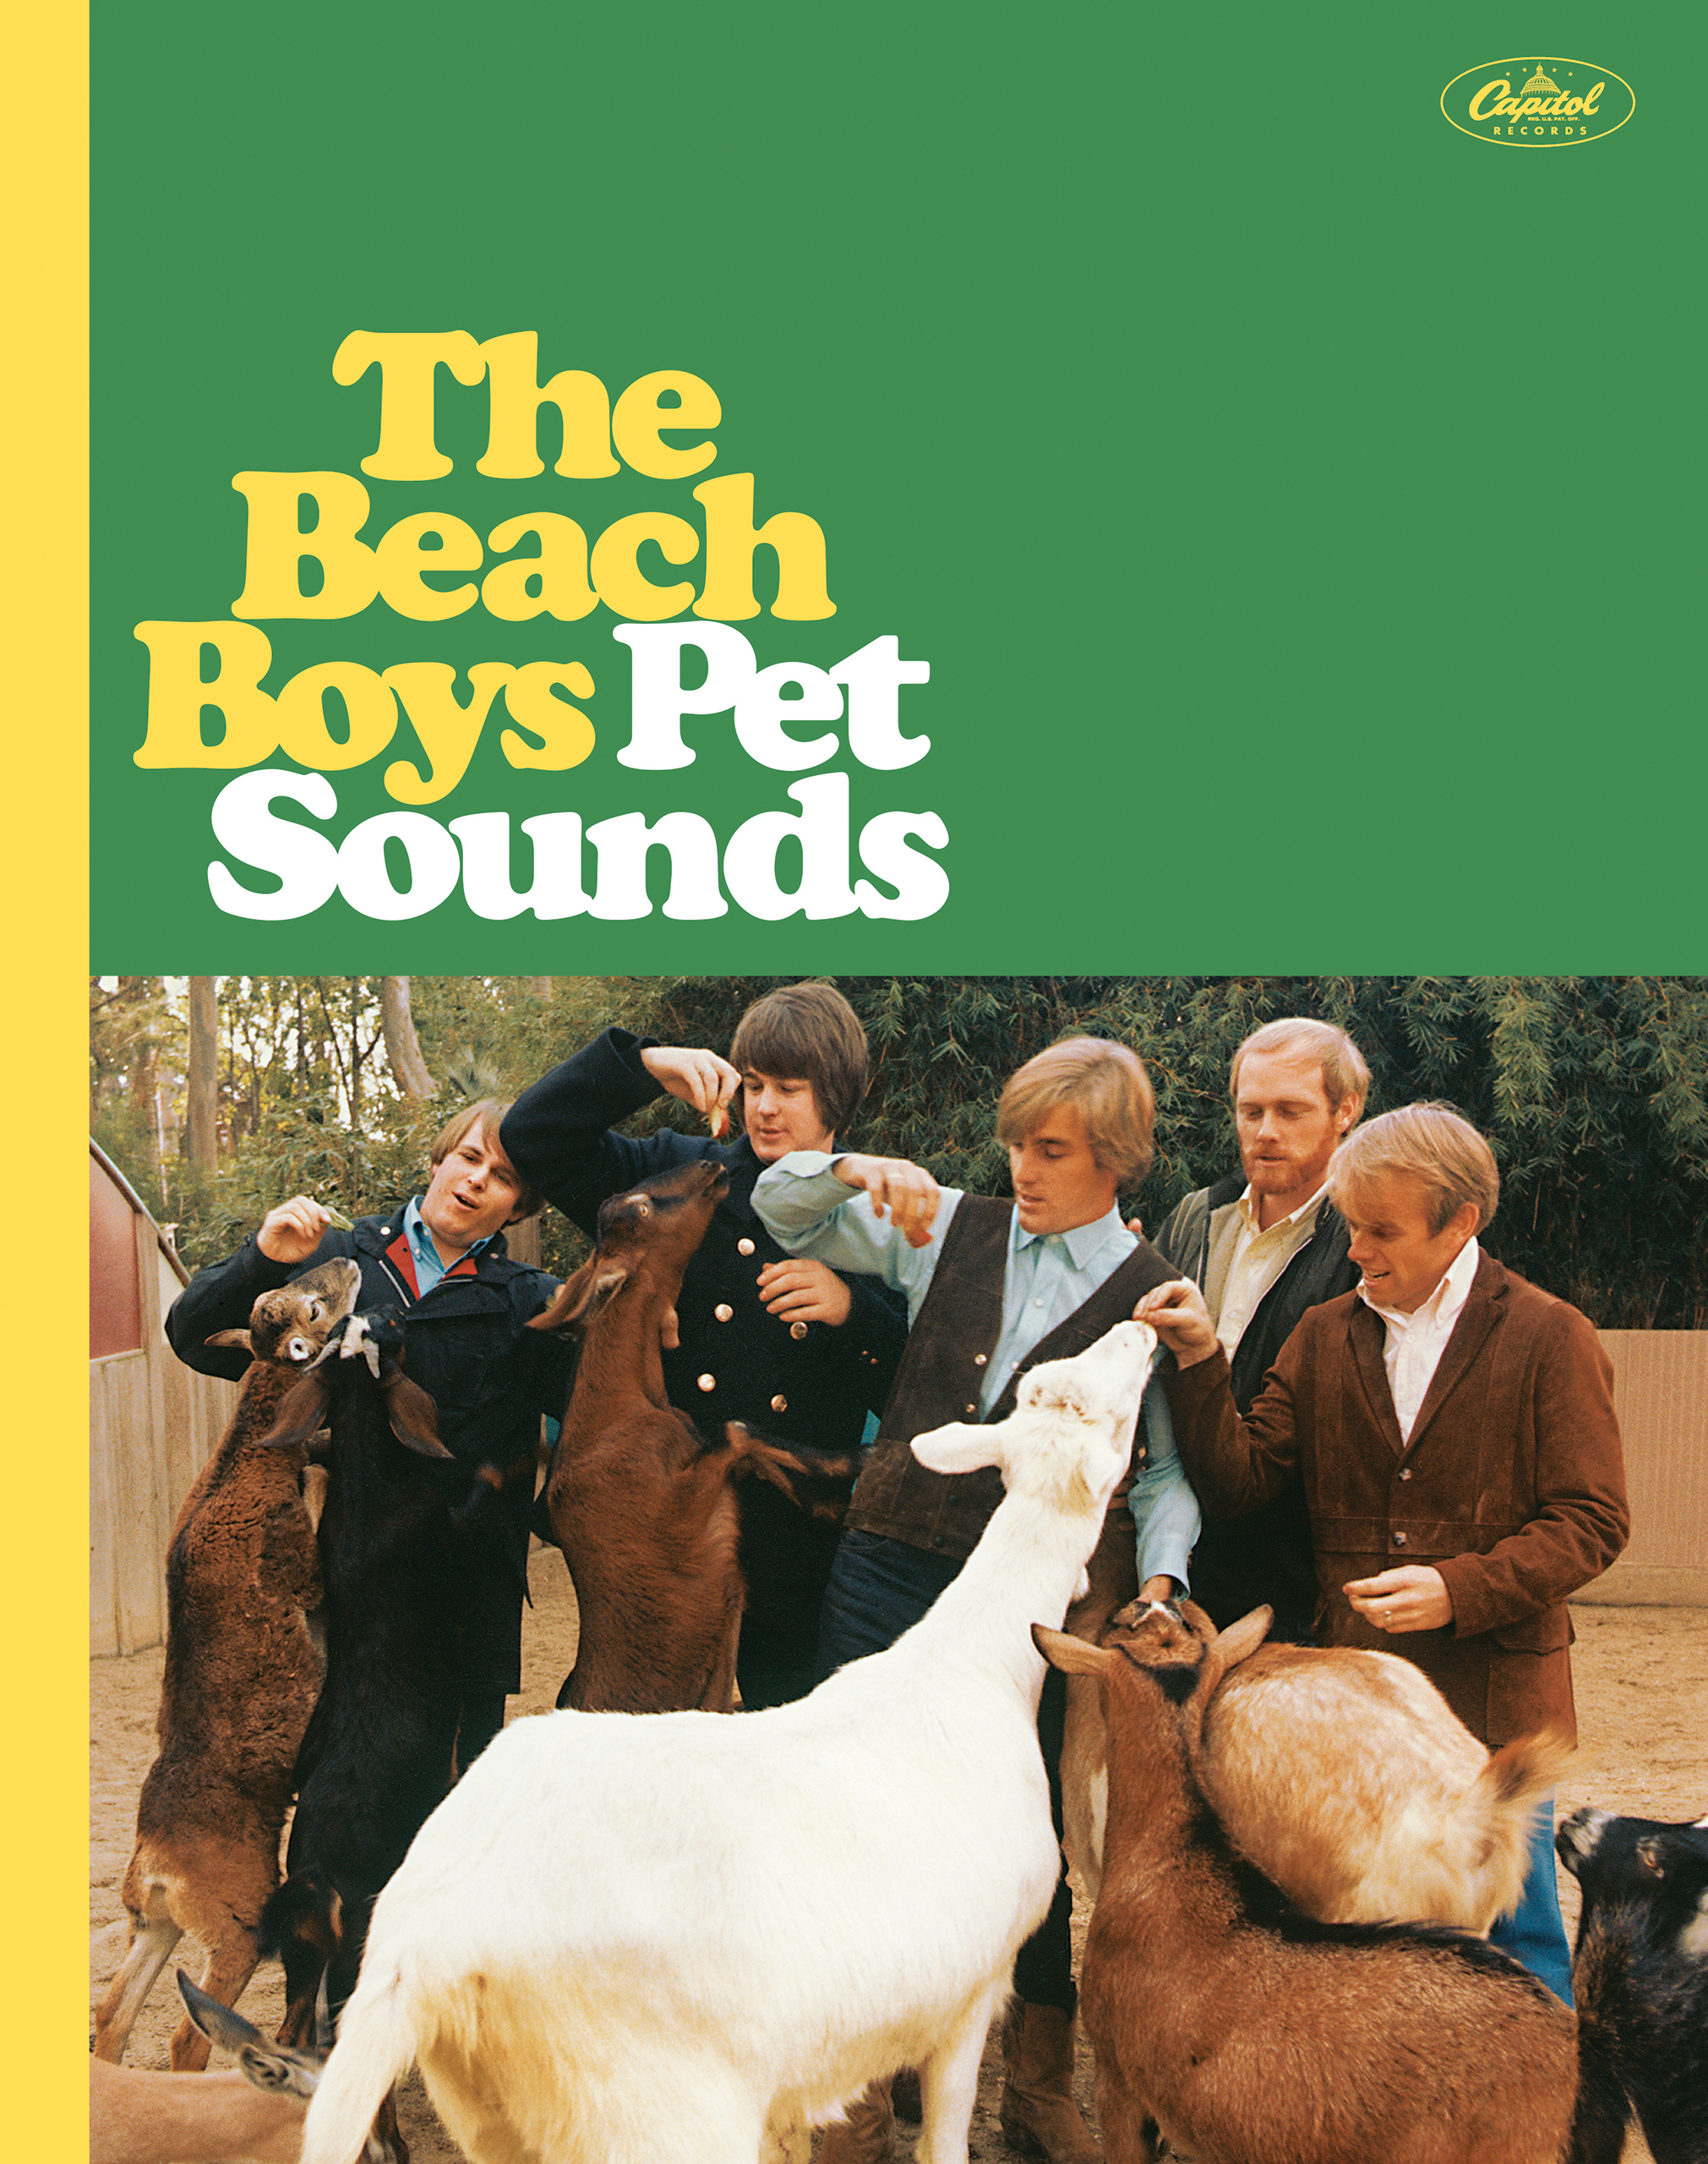 50th Anniversary Collectors Edition cover of Pet Sounds.